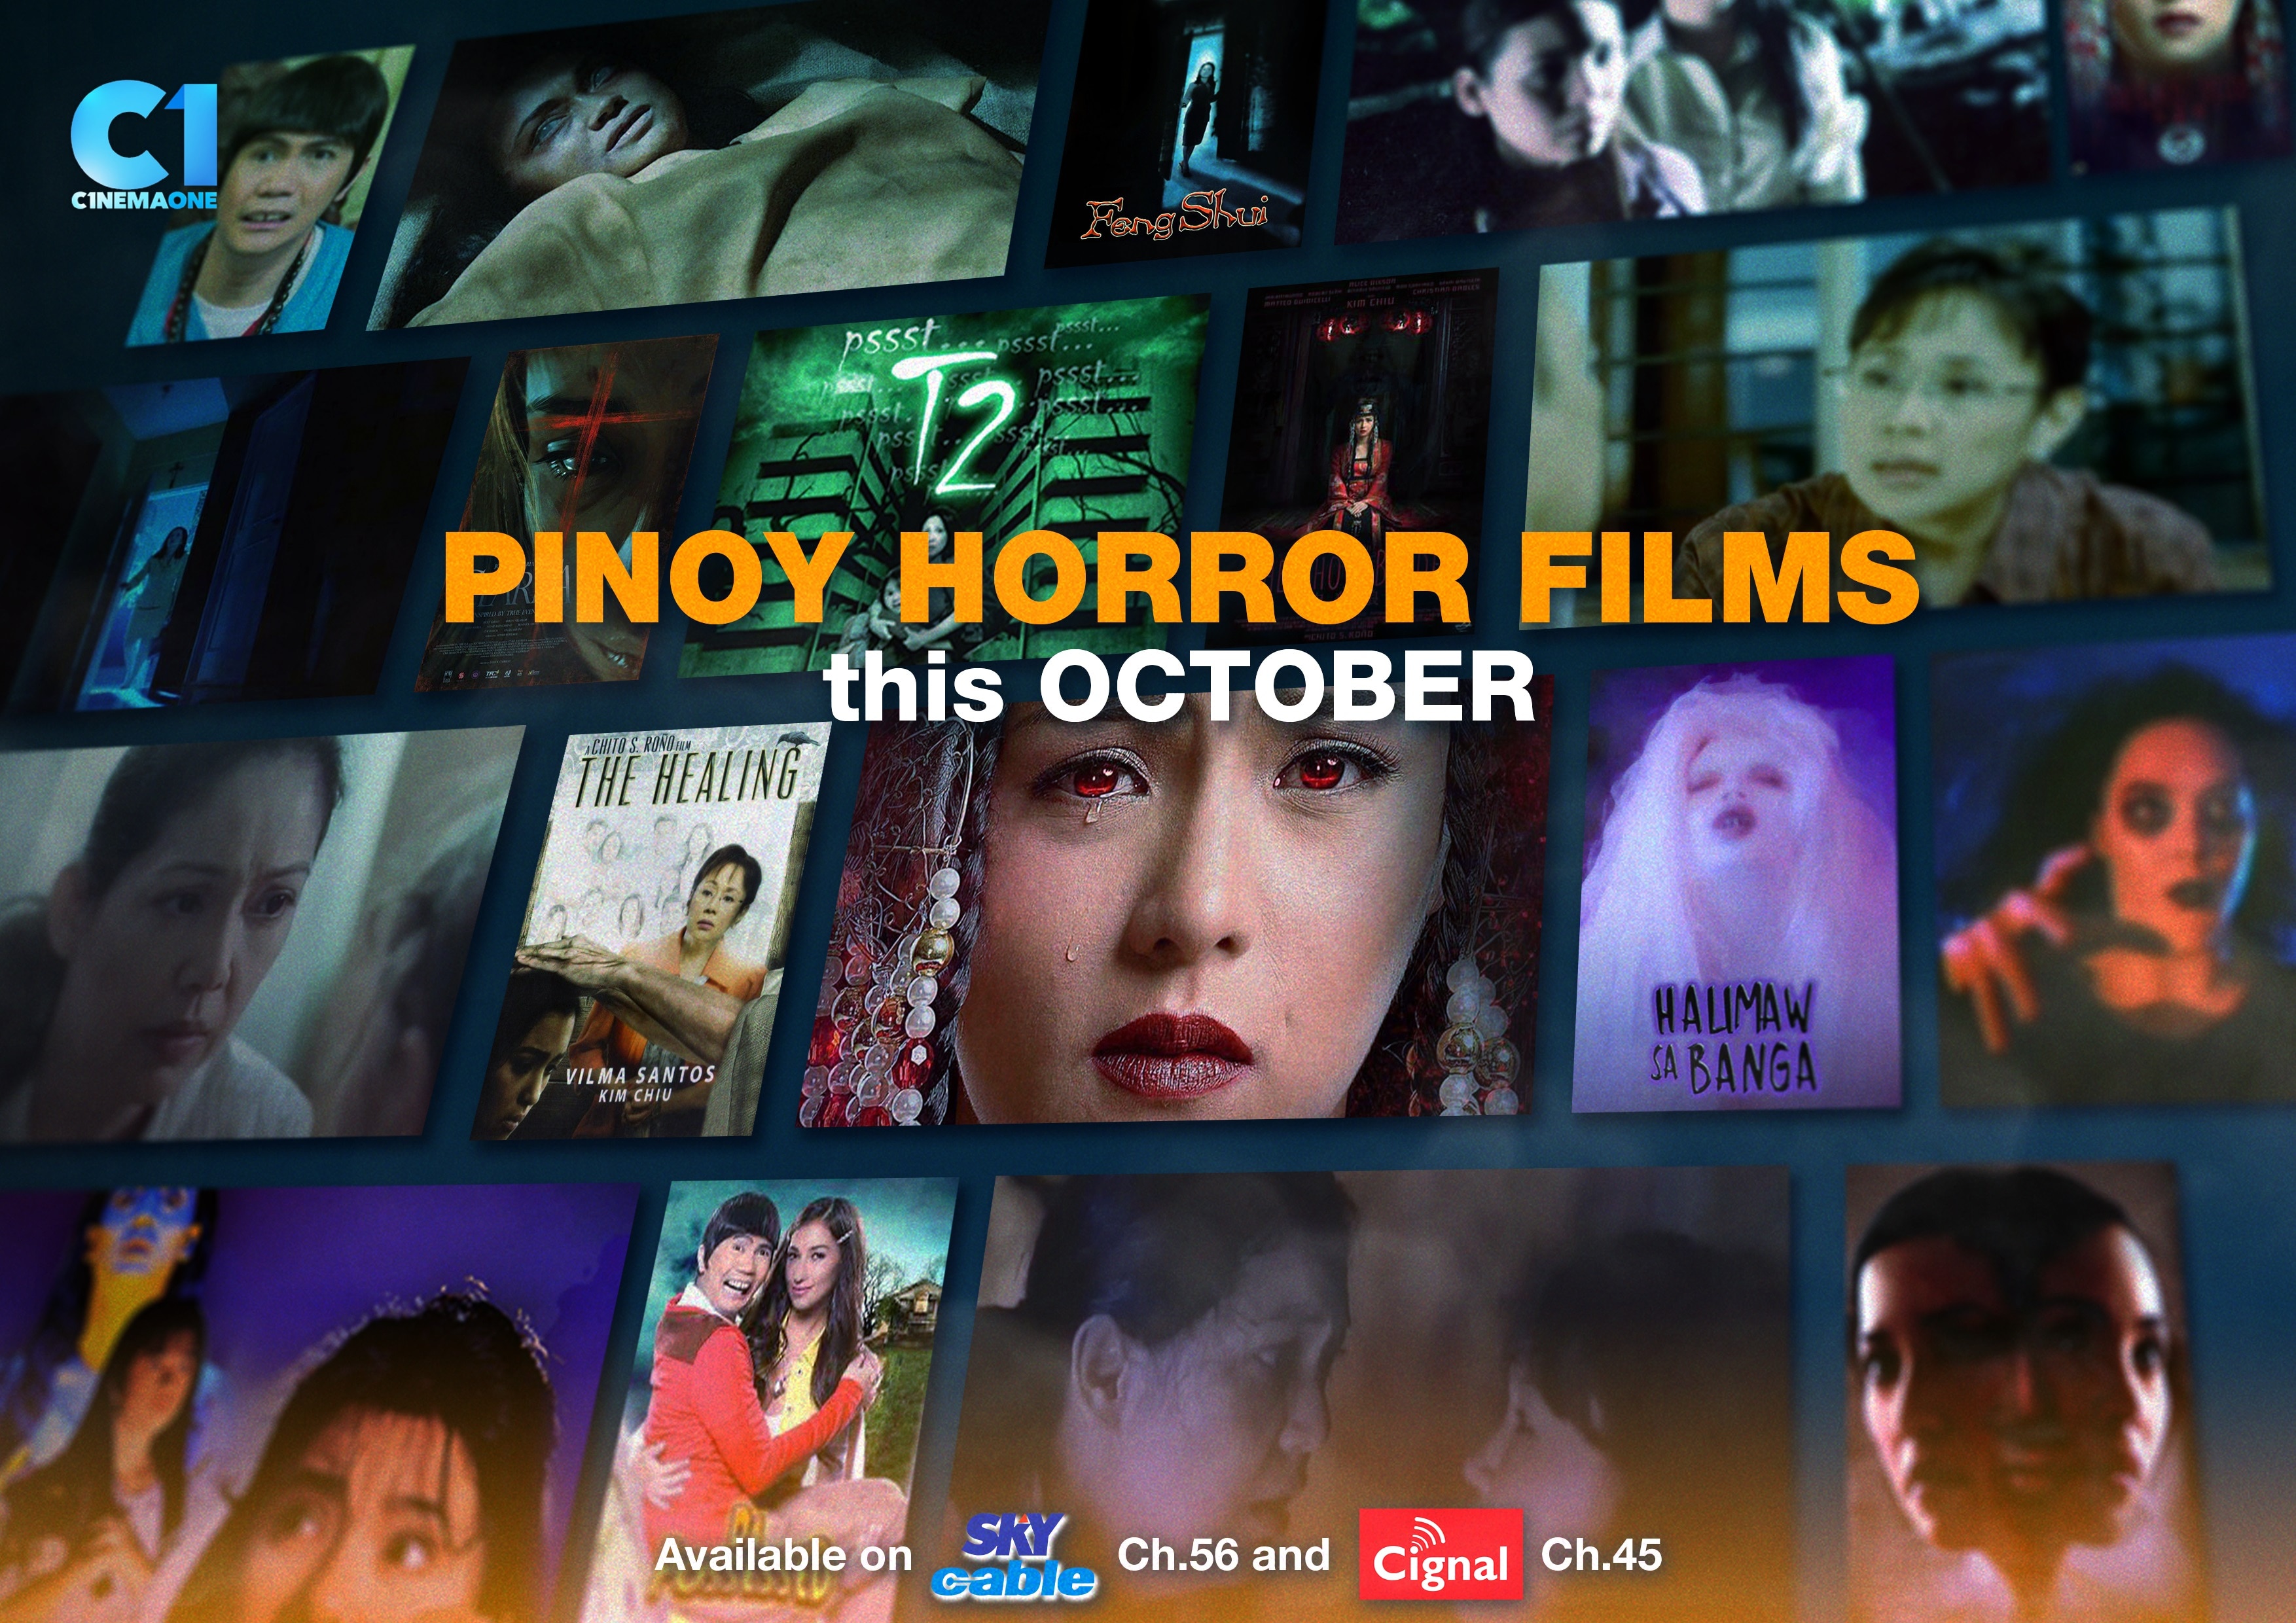 Pinoy horror films take centerstage on Cinema One this October